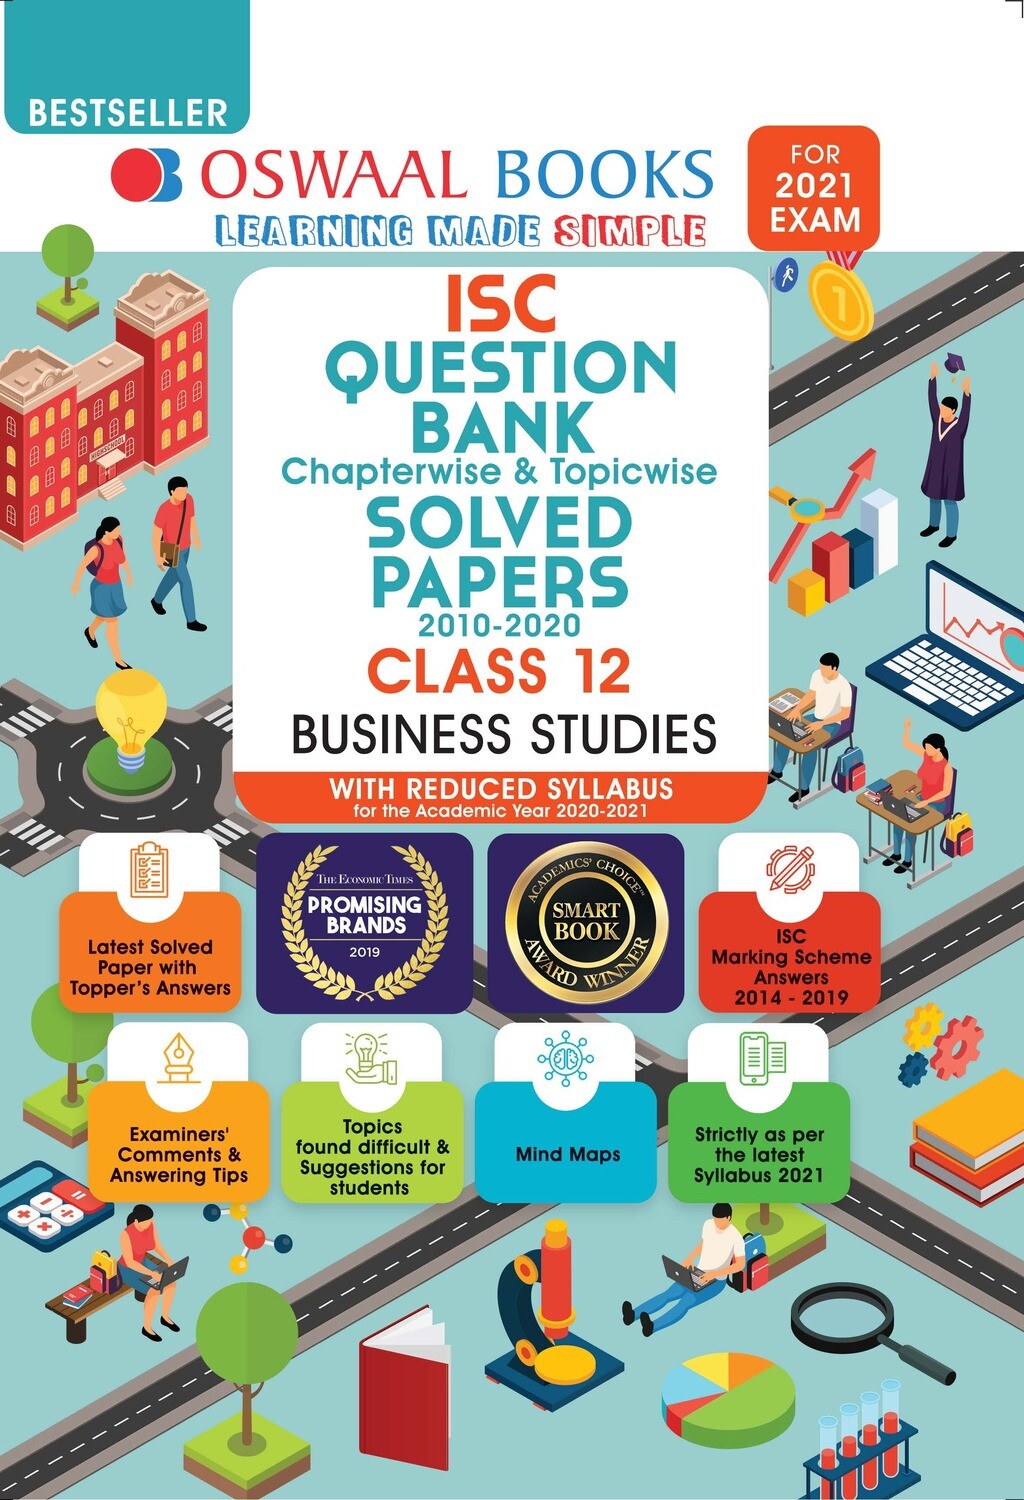 Buy e-book: Oswaal ISC Question Bank Chapterwise & Topicwise Solved Papers, Business Studies, Class 12 (Reduced